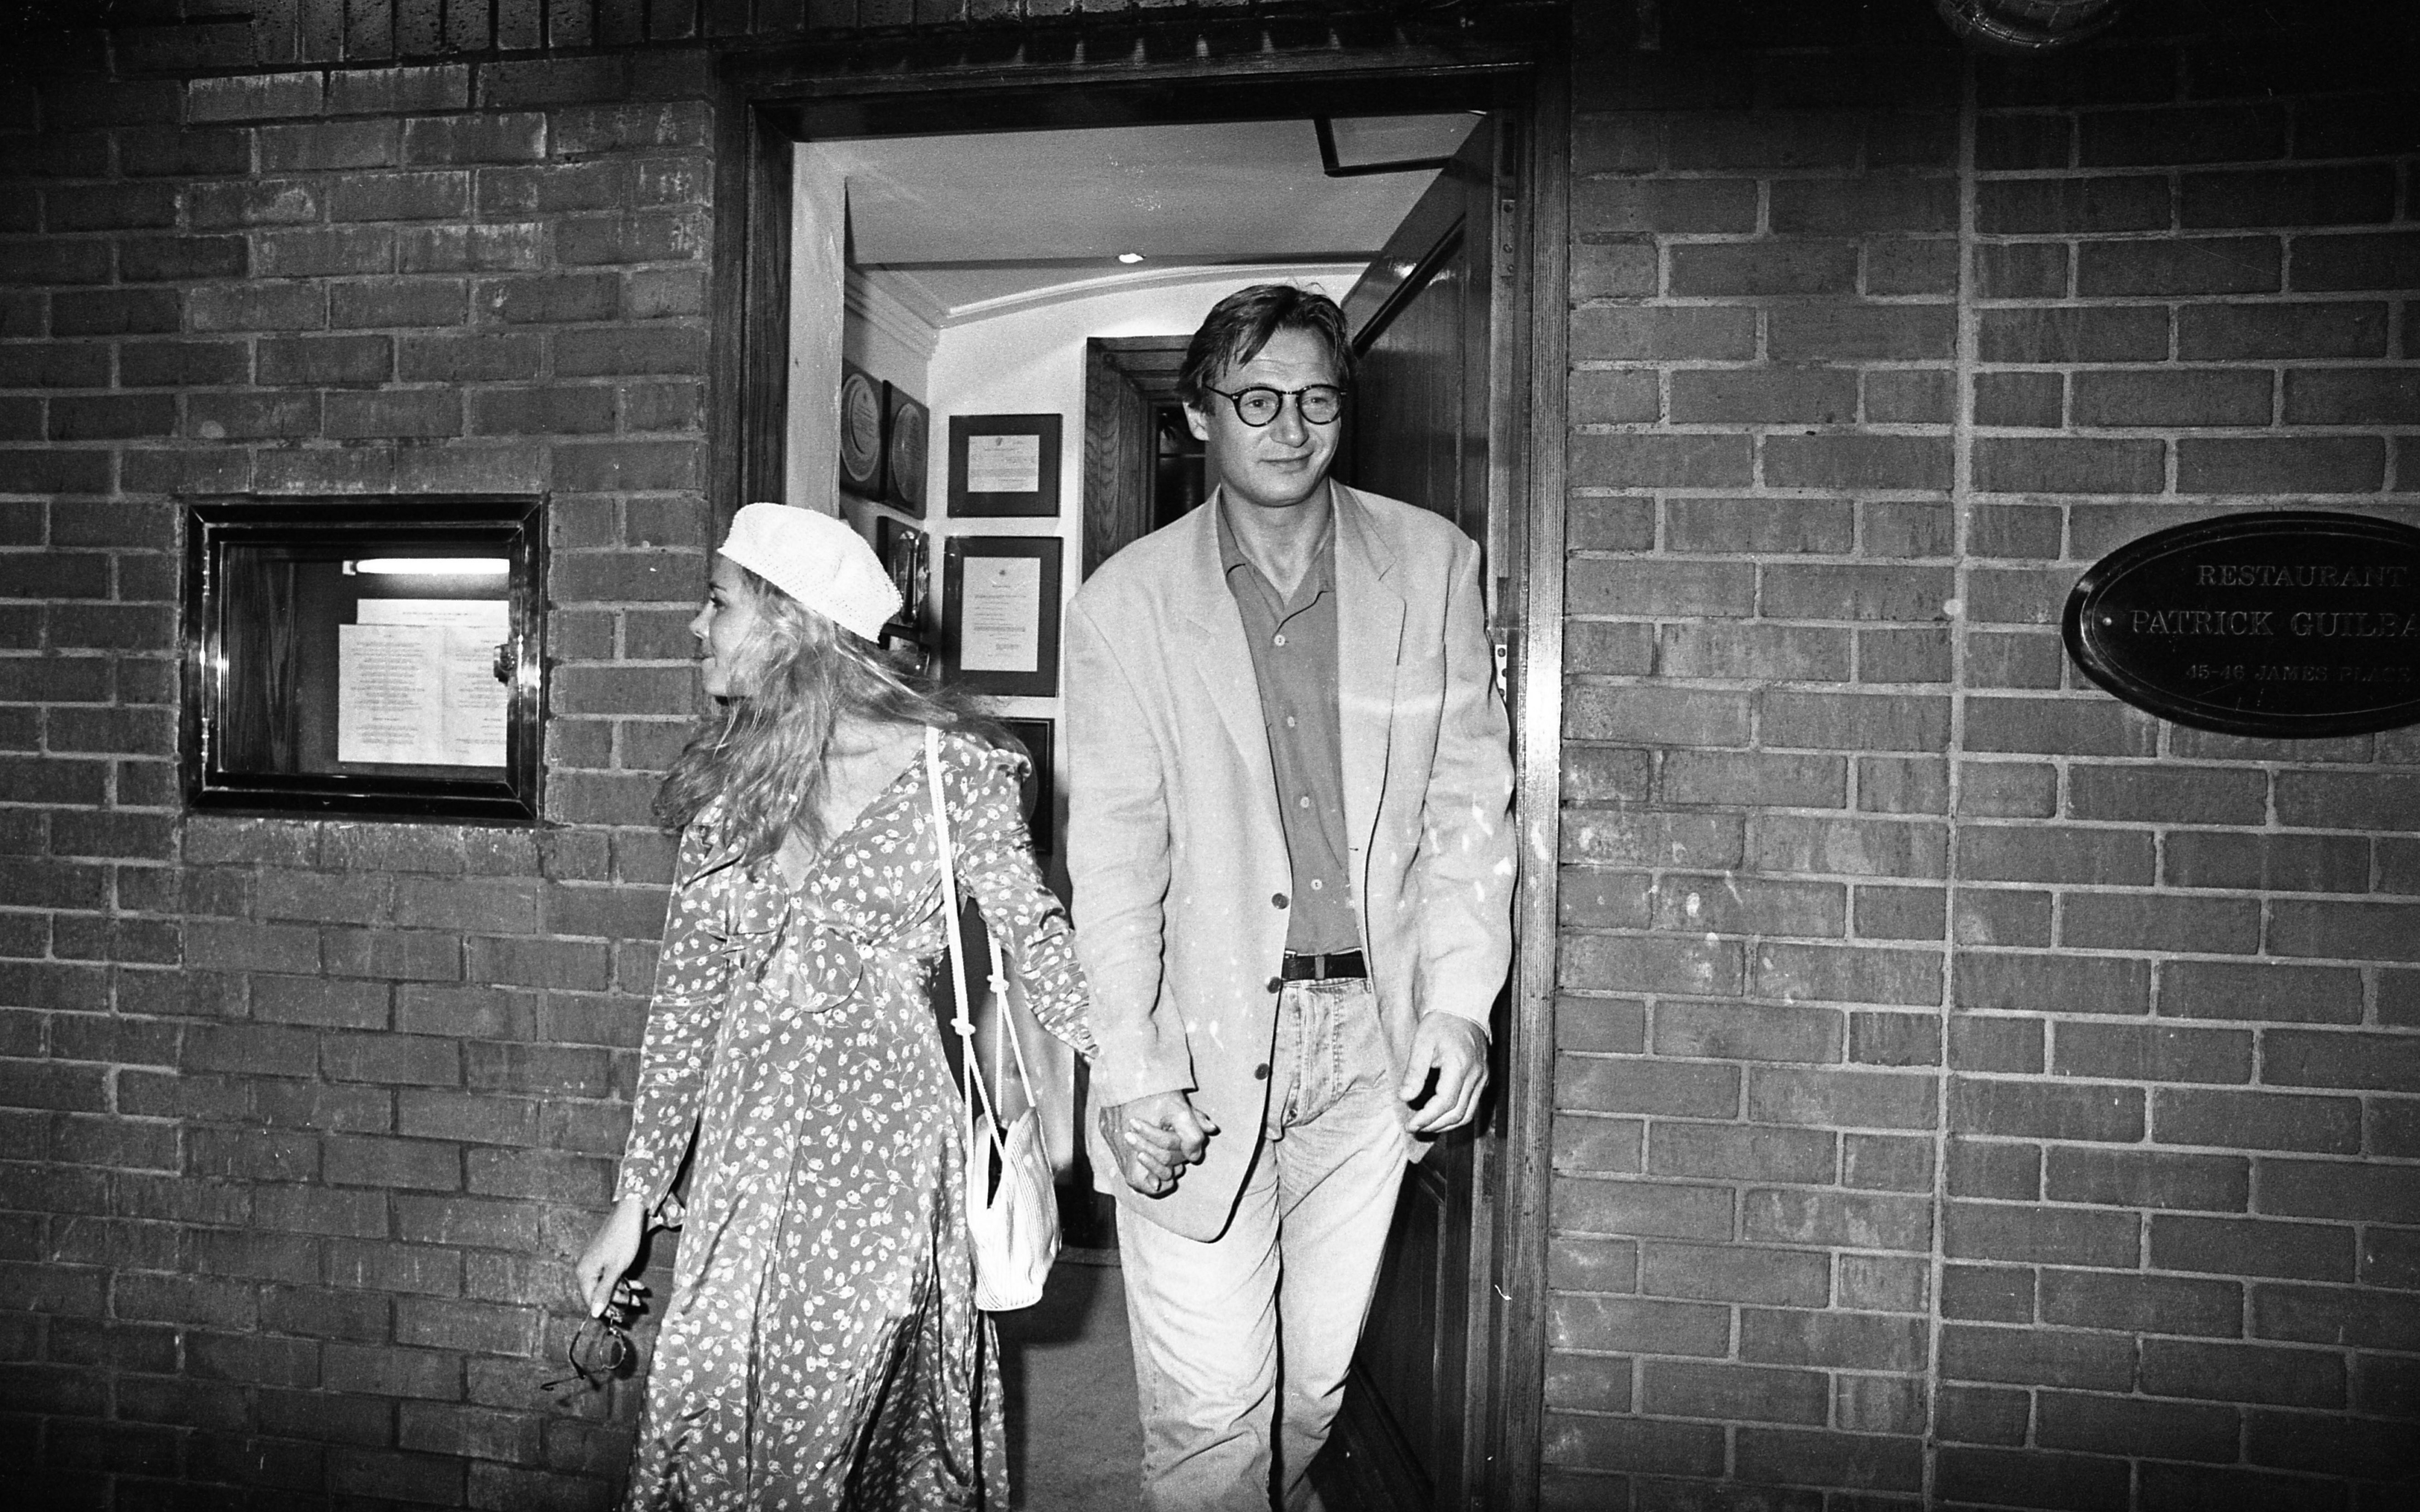 Natasha Richardson and Liam Neeson pictured leaving Restaurant Patrick Guilbaud on July 14, 1993 in Dublin, Ireland. / Source: Getty Images